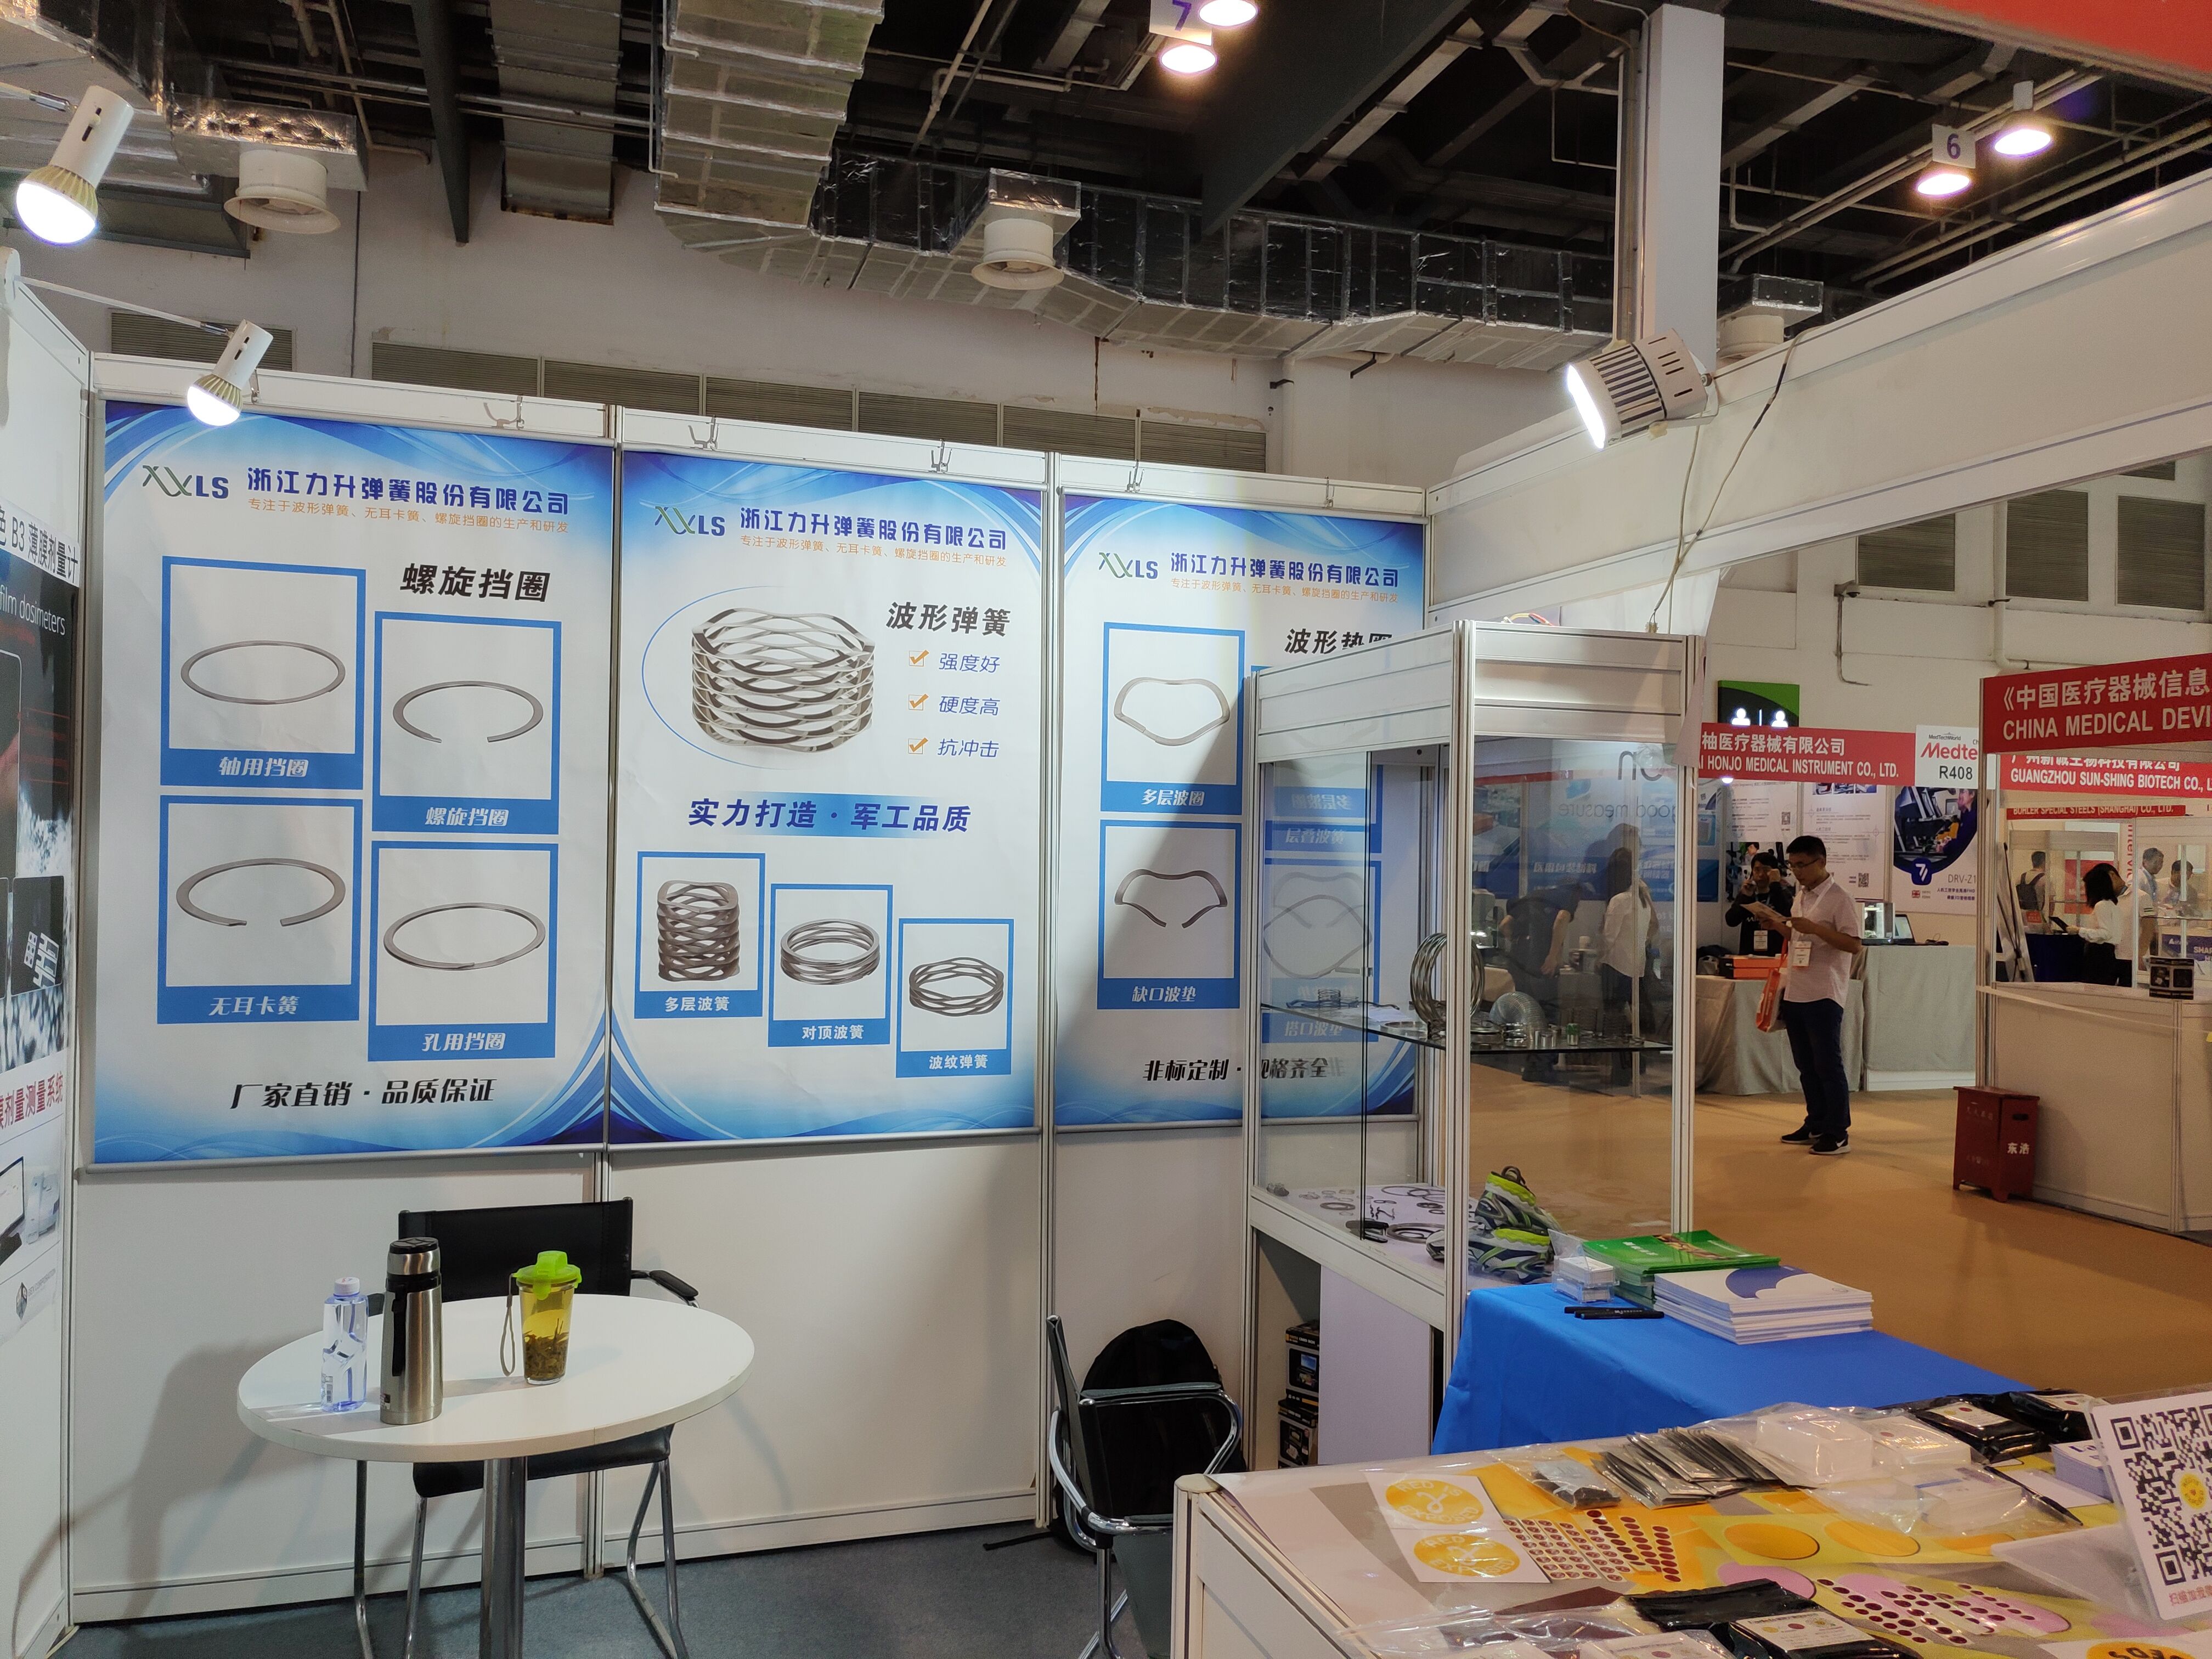 We attented the Medtec China 2019 Exhibition on Sep. 25-27 in shanghai(wave springs)